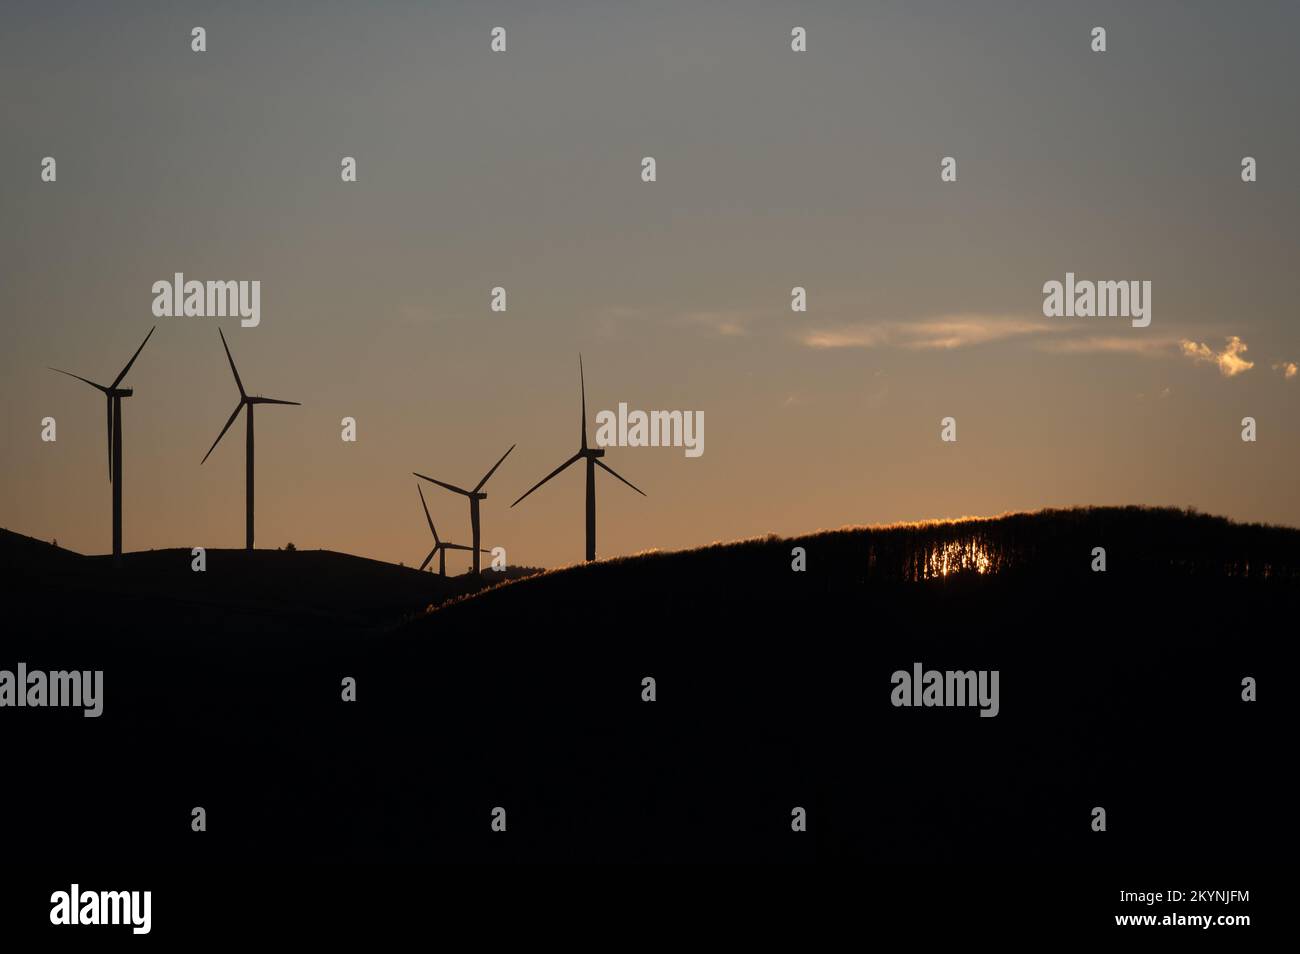 Wind turbines, a source of renewable energy, are silhouetted on a hilltop at sunrise. Stock Photo